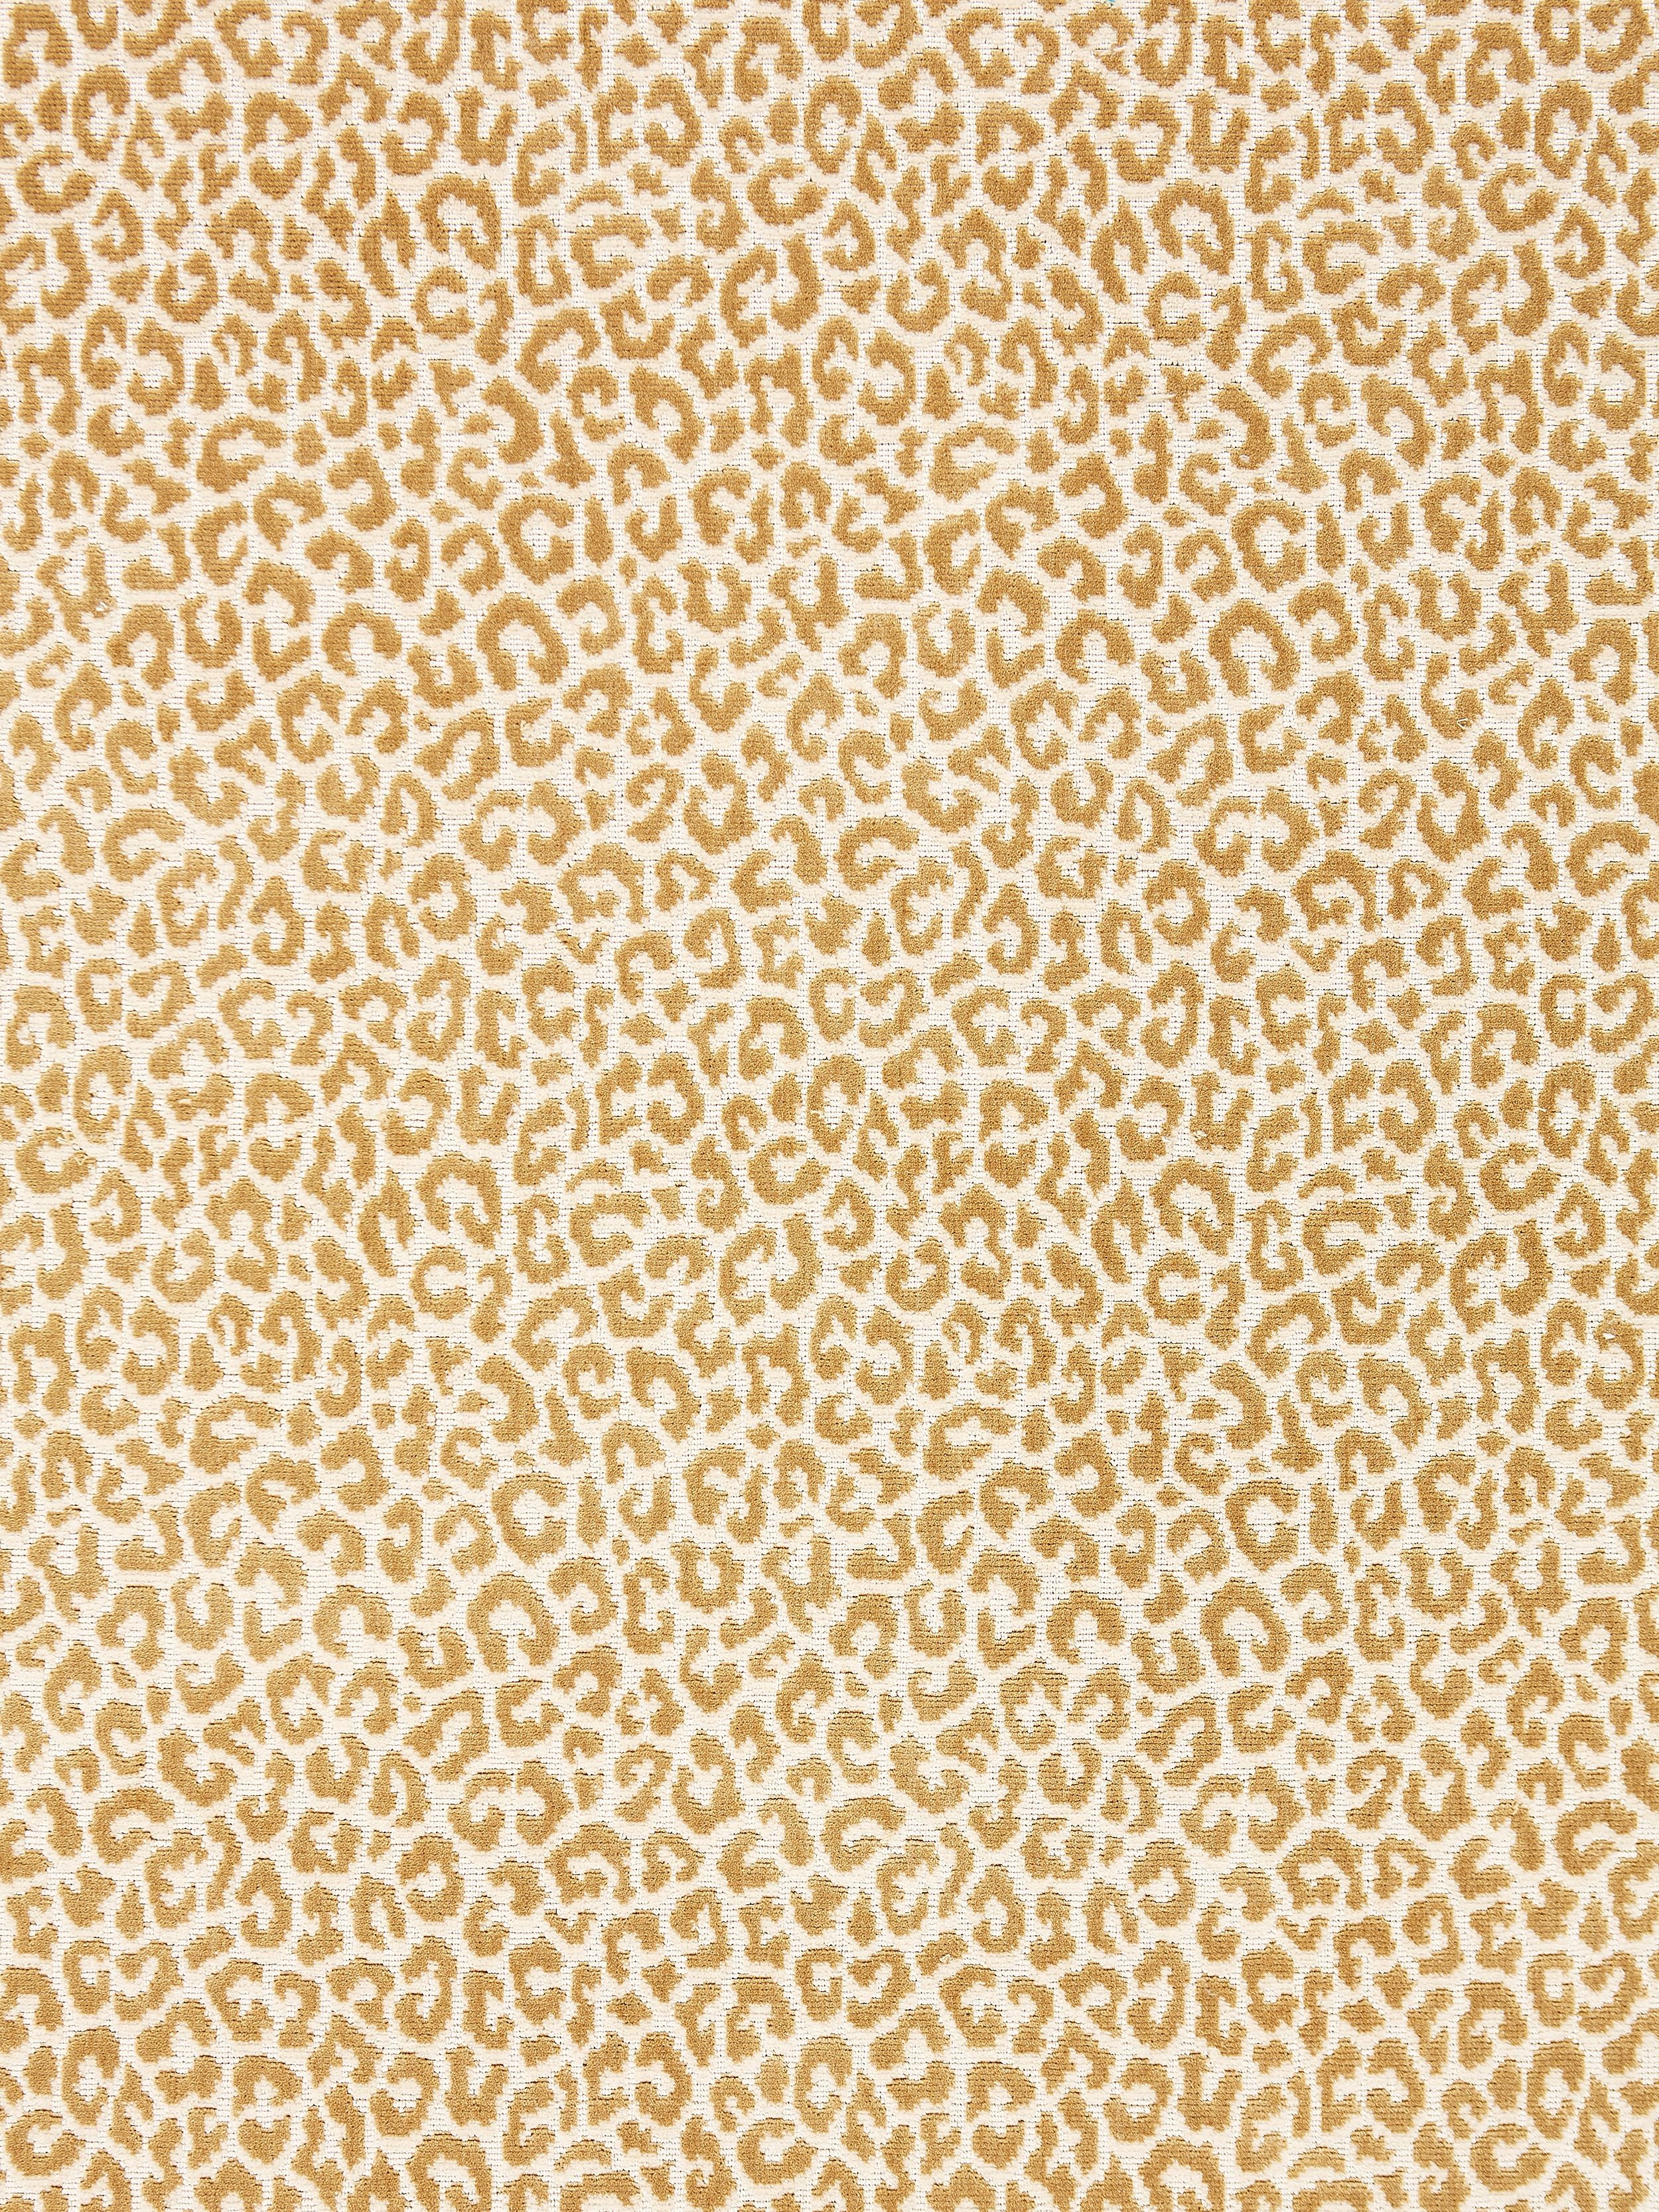 Panthera Velvet fabric in camel color - pattern number SC 000127037 - by Scalamandre in the Scalamandre Fabrics Book 1 collection